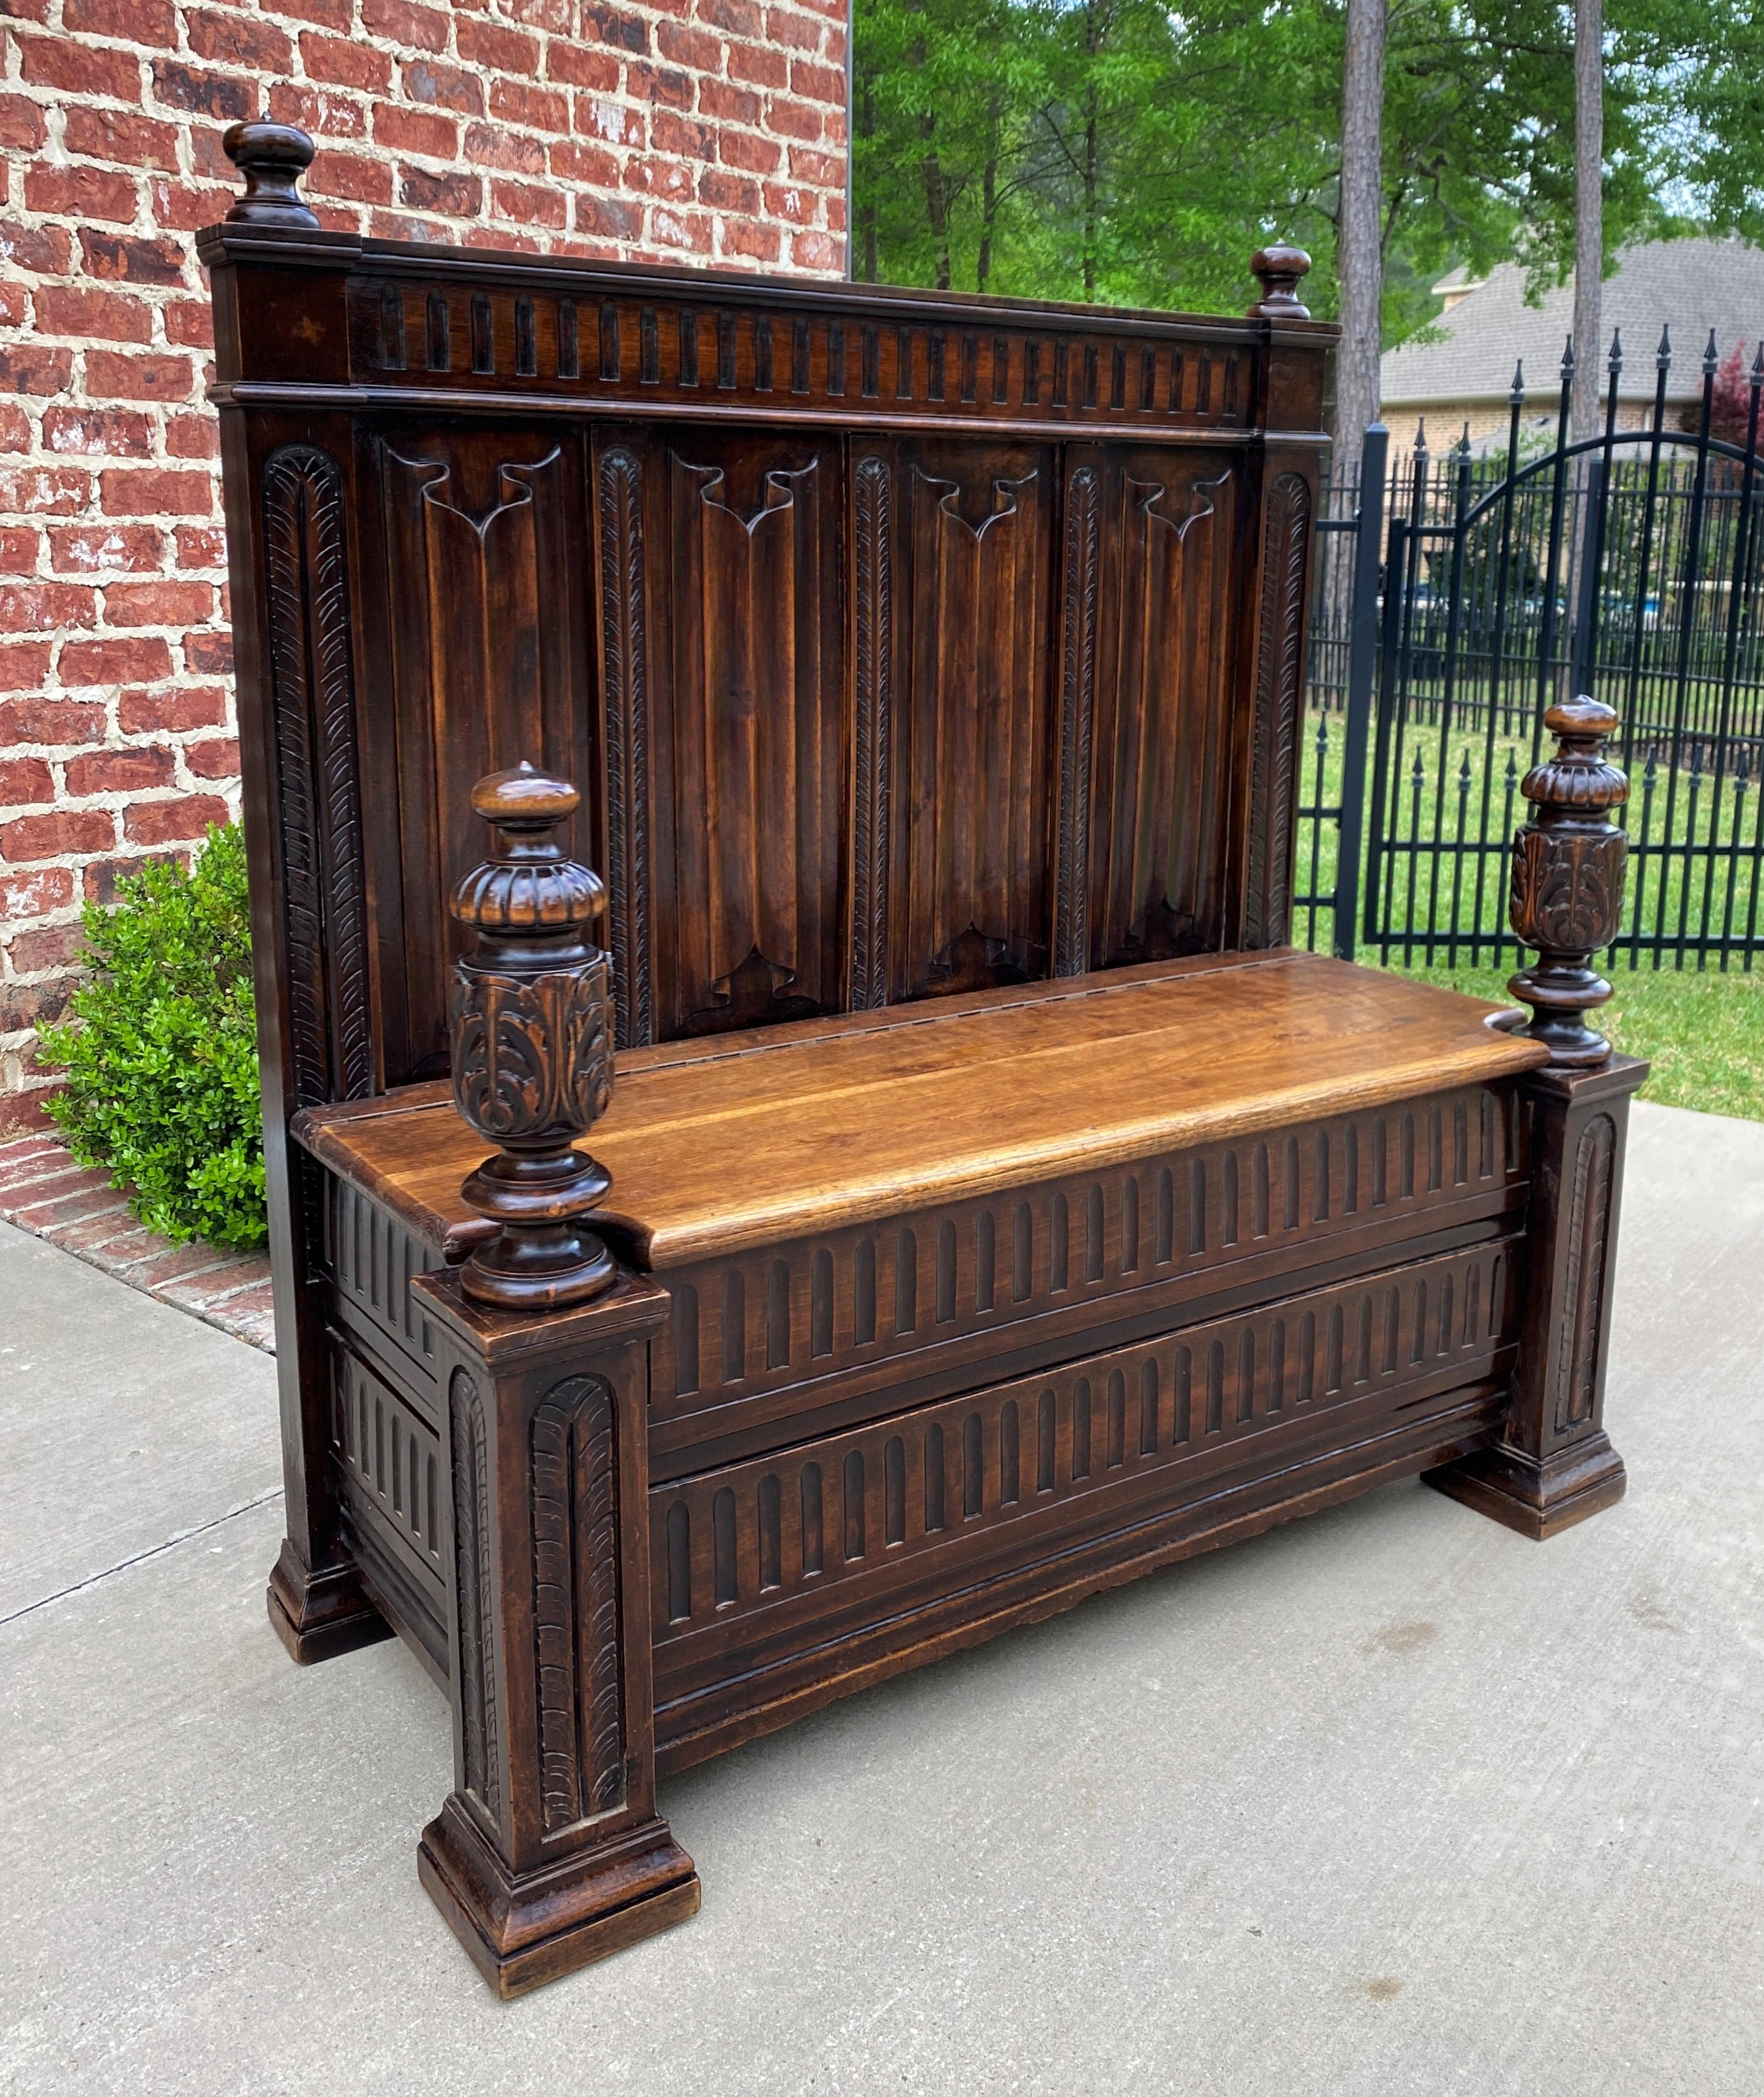 Antique French Bench Settee Gothic Revival Oak Lift Top Seat Storage Trunk 19C For Sale 4